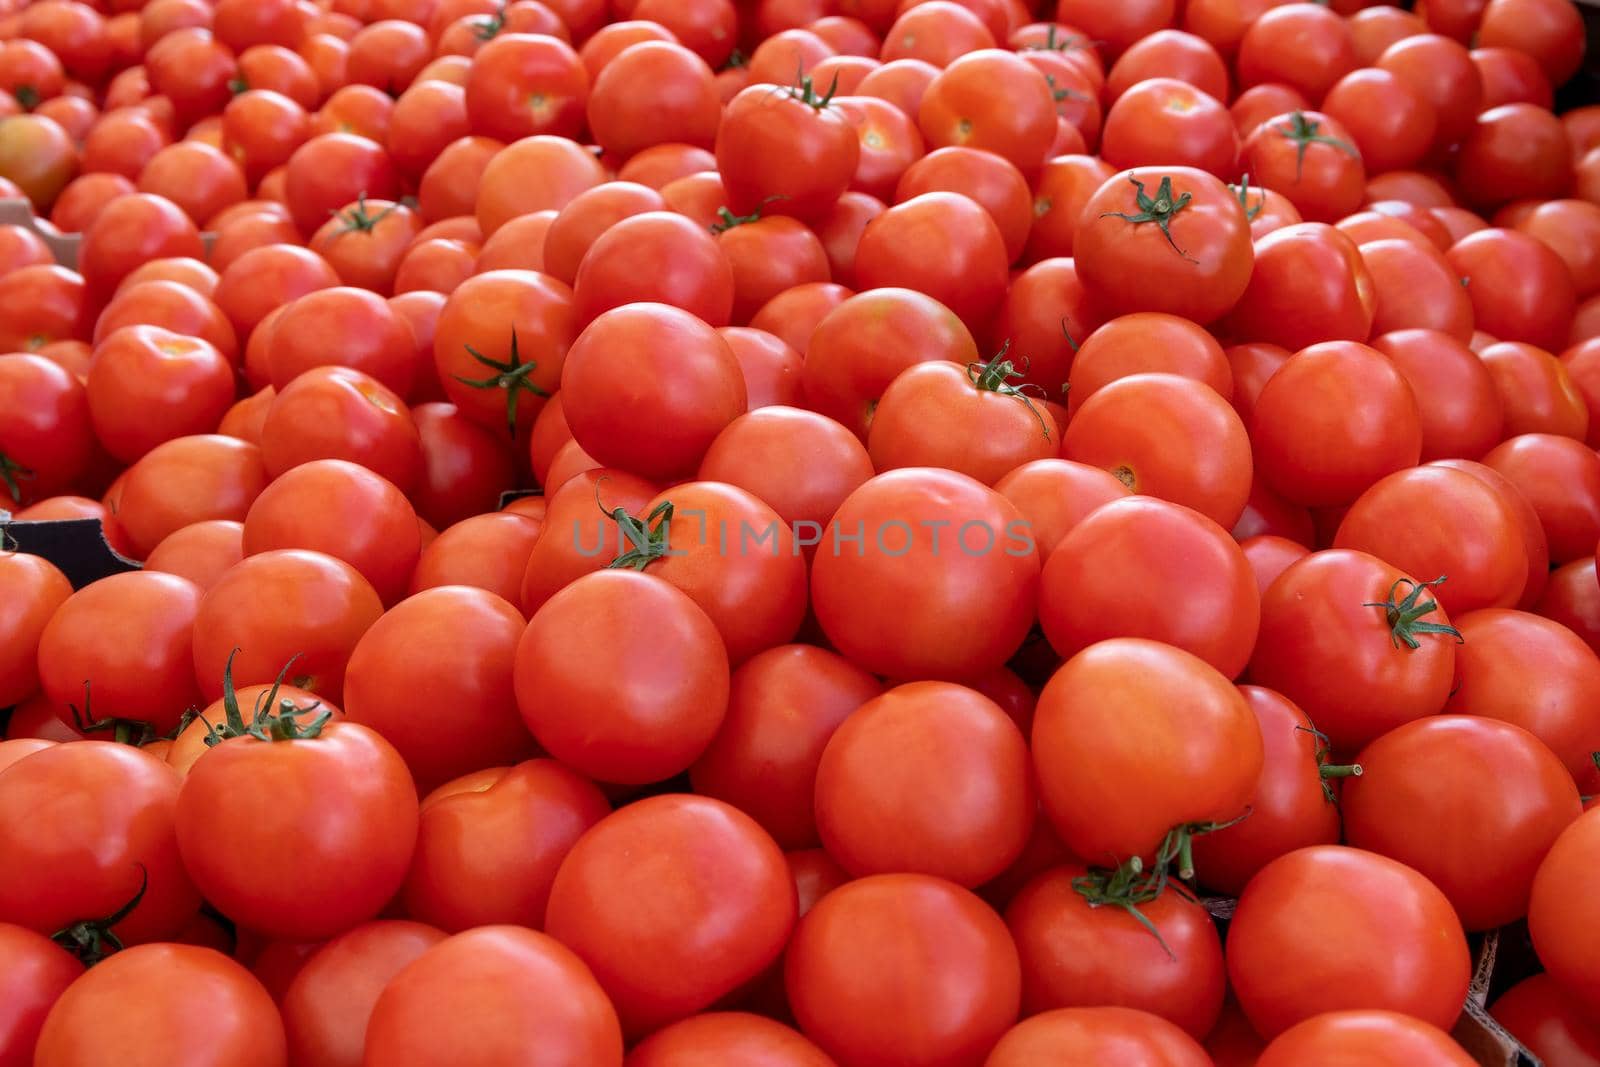 Large pile of fresh, organic tomatoes on a market stall